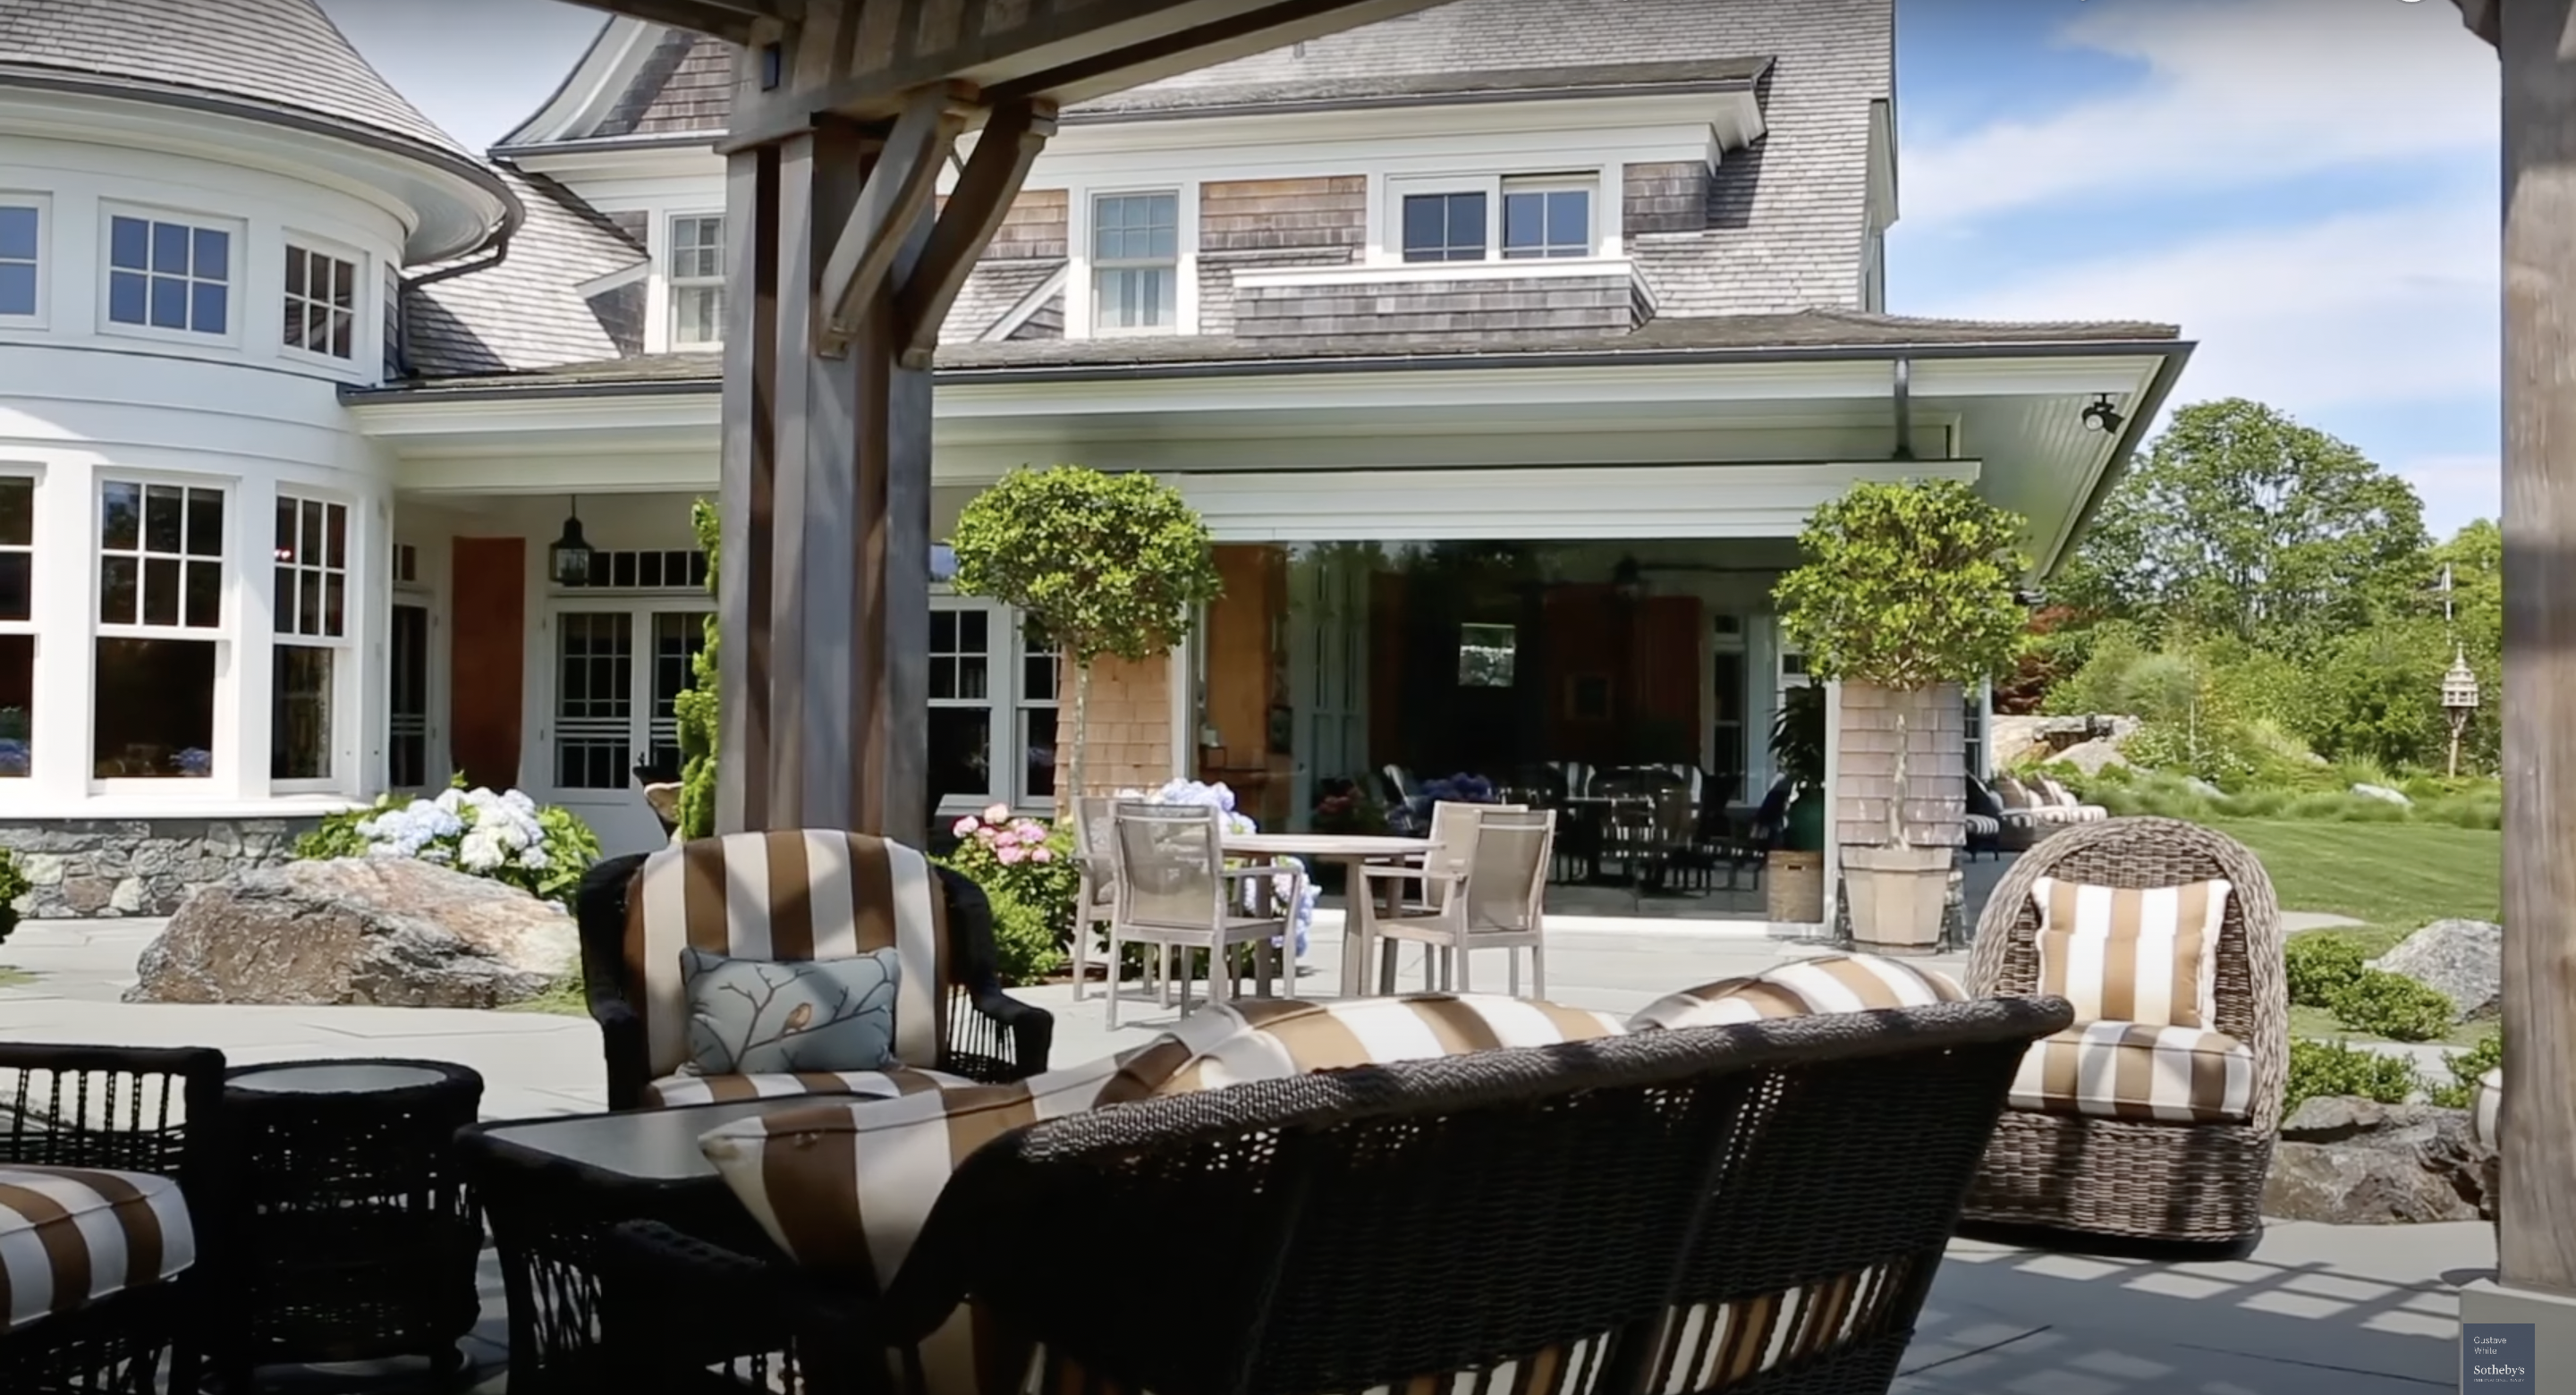 Judge Judy's patio in her Newport, Rhode Island home | Source: Youtube.com/Gustave White Sotheby's International Realty